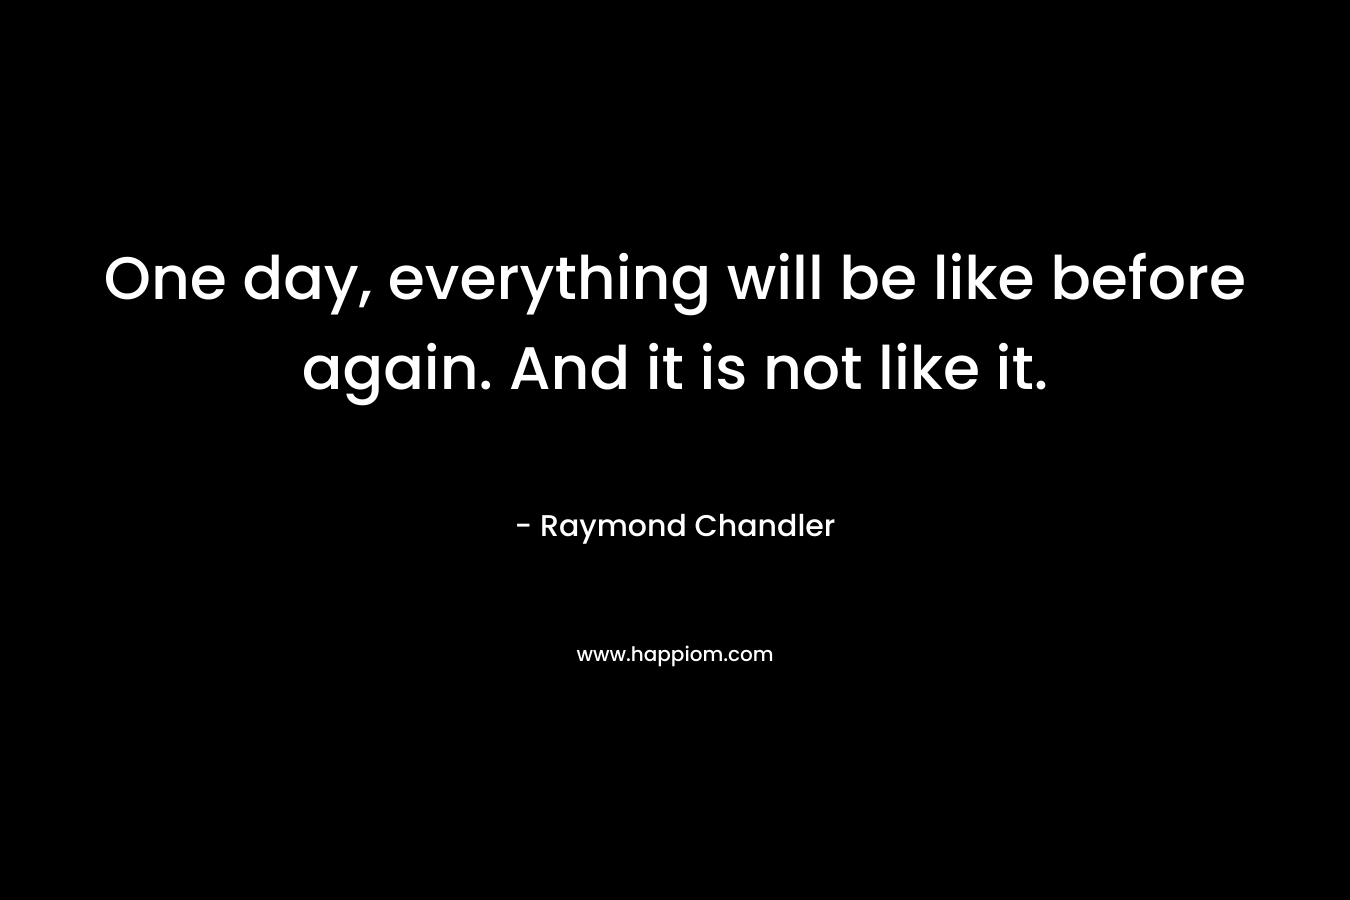 One day, everything will be like before again. And it is not like it. – Raymond Chandler